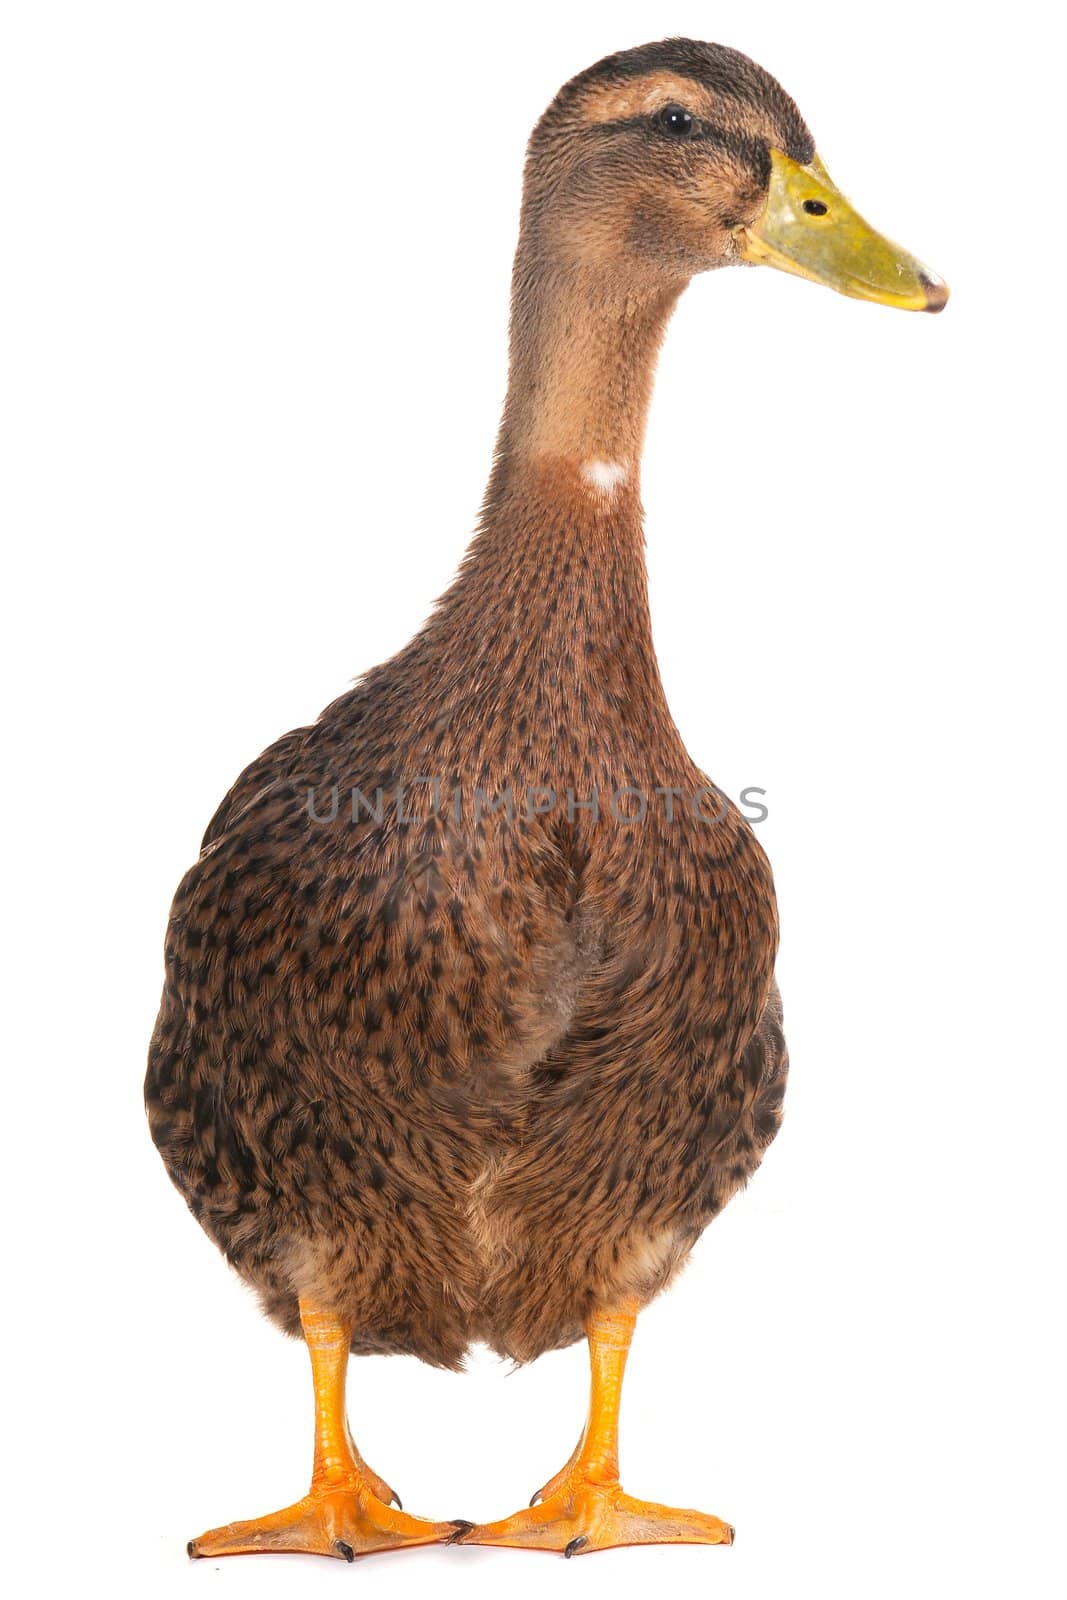  duck on a white background                           